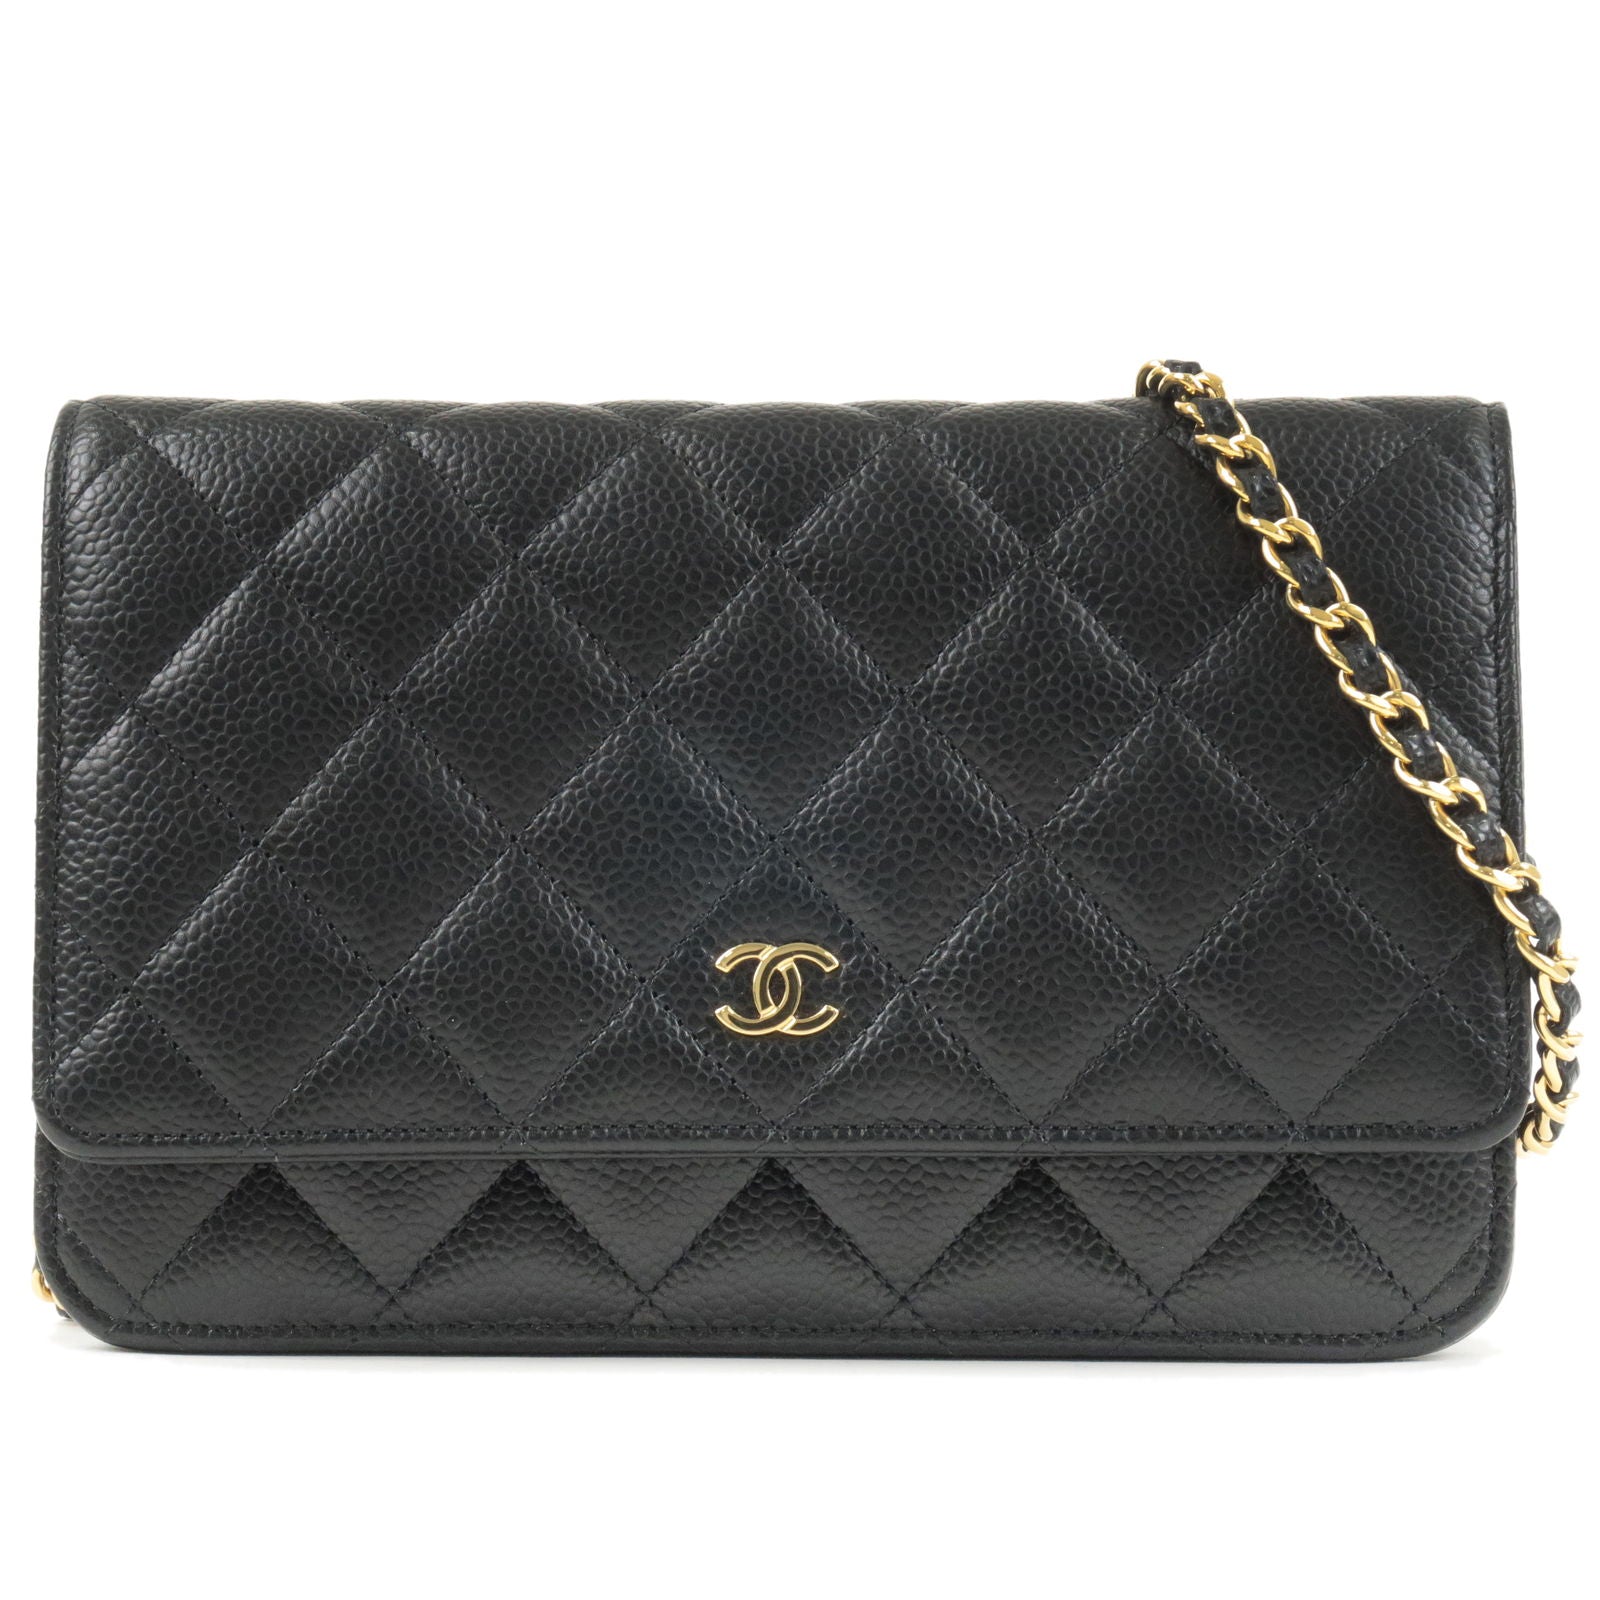 Matelasse - ep_vintage luxury Store - Caviar - WOC - Black - CHANEL - Skin  - Chanel Pre-Owned 1995 diamond-quilted 2 in 1 bag - Wallet - AP0250 – dct  - GHW - Chain